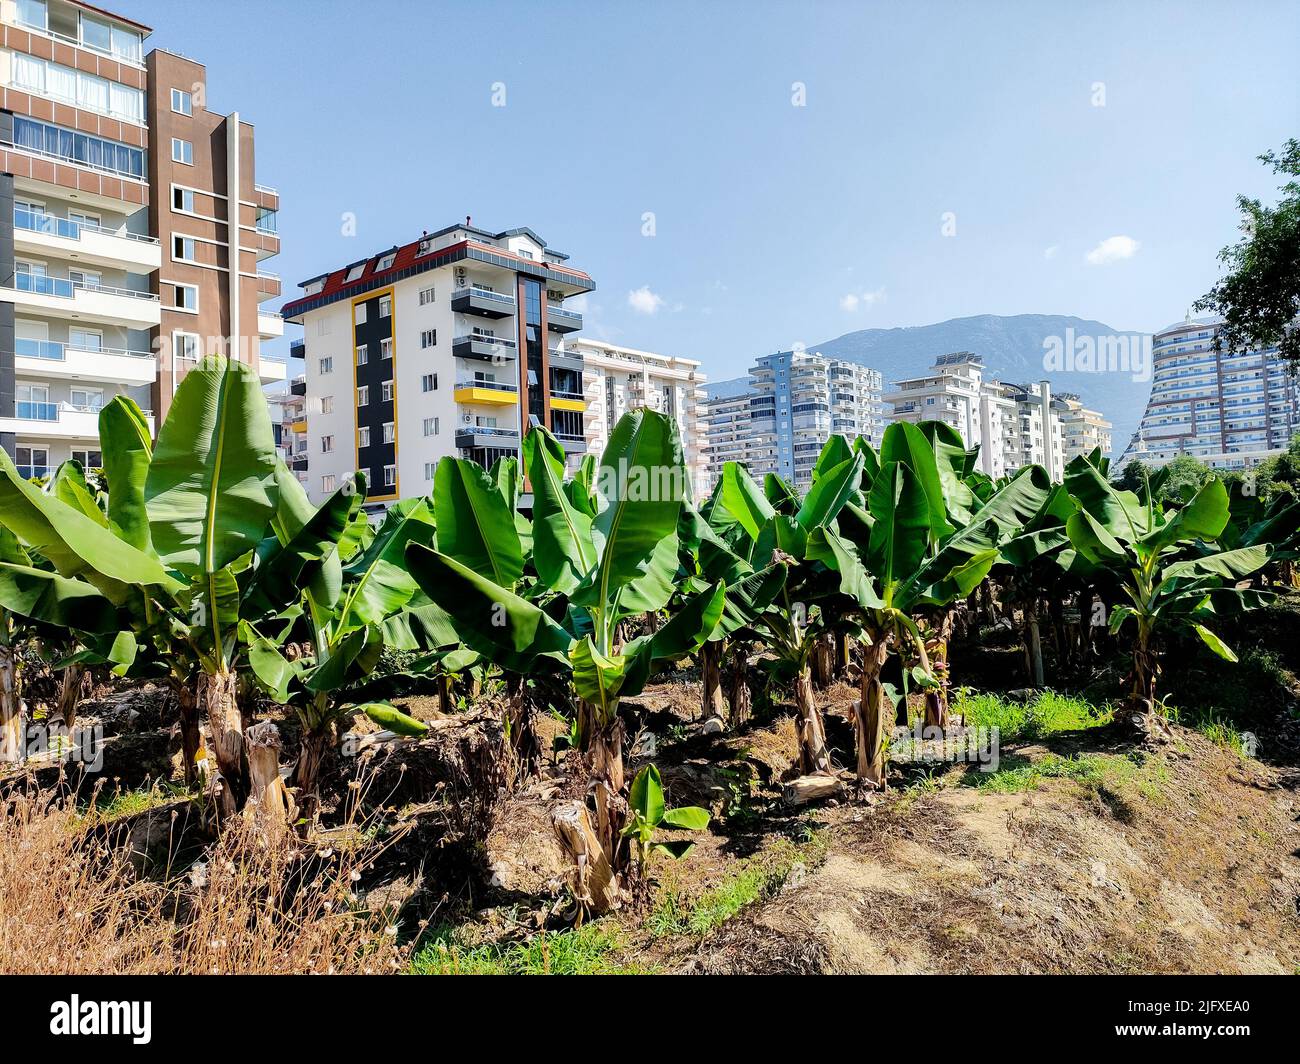 Concept of harmonious fusion of city and nature. Tall modern houses on background of banana palms and mountains.  Stock Photo